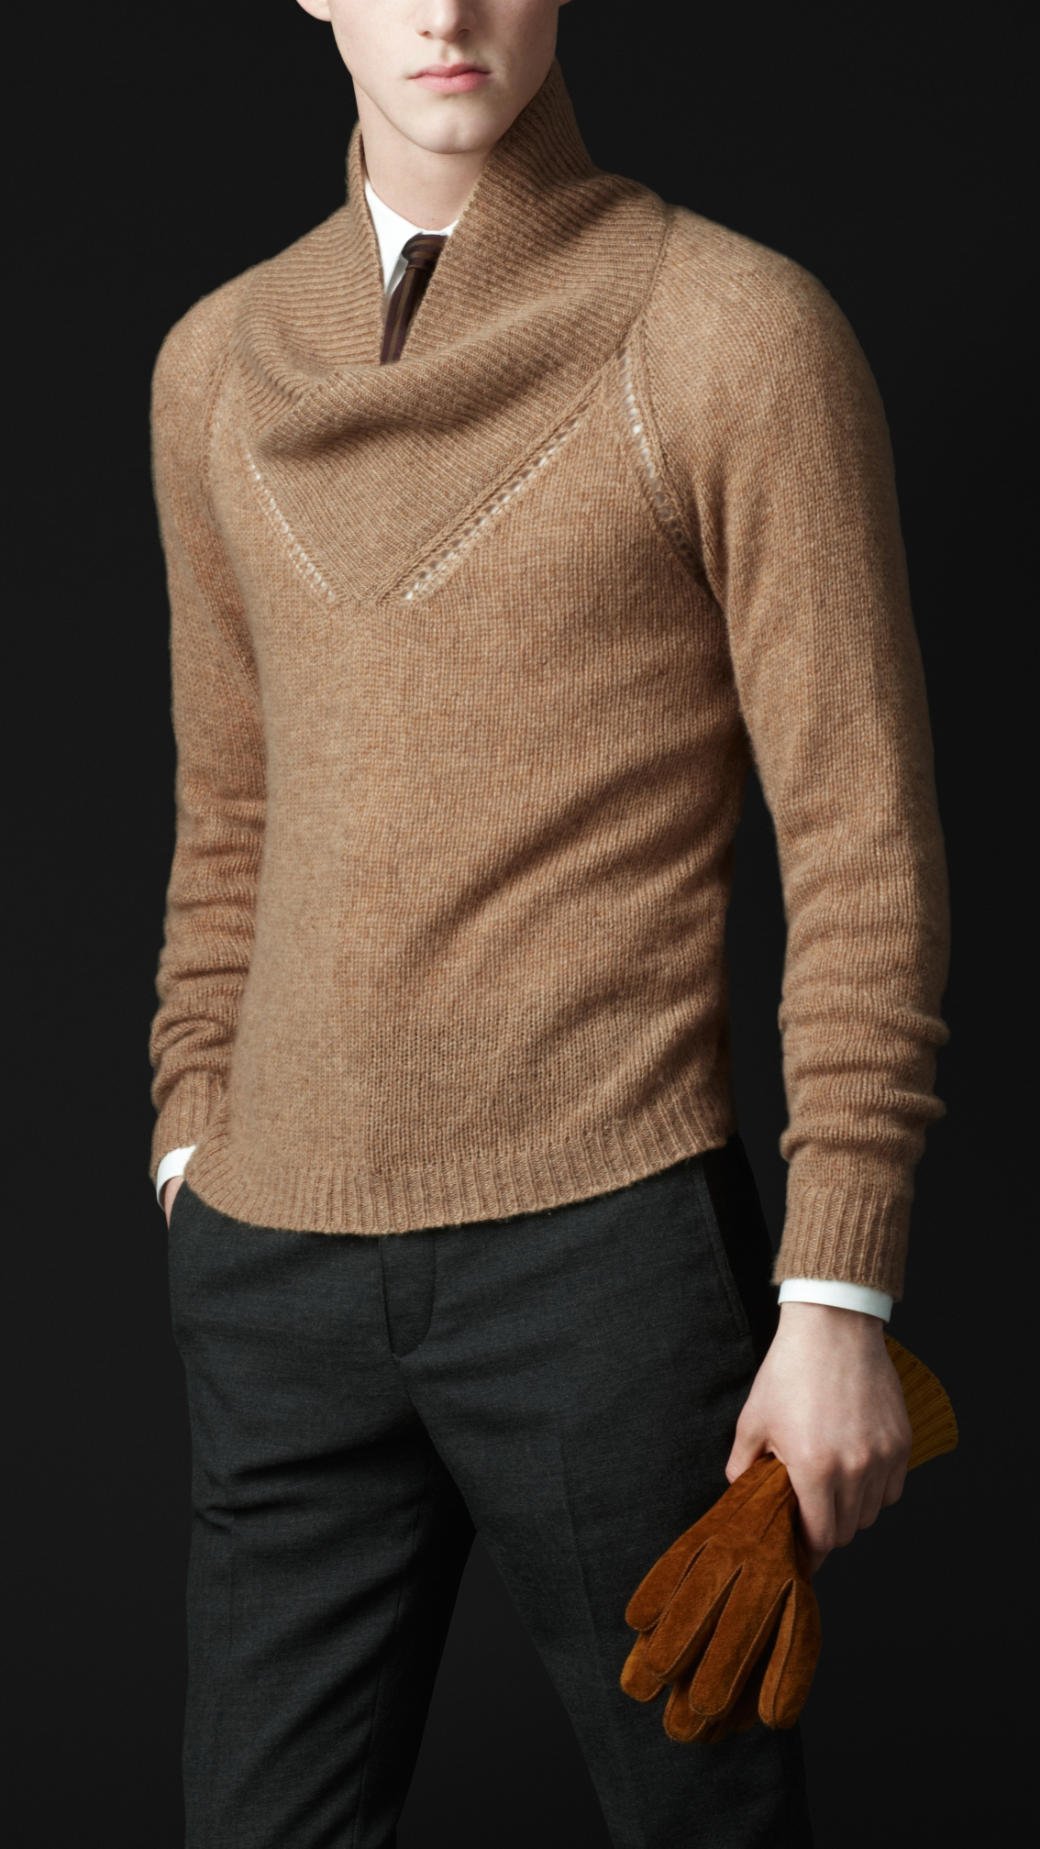 Lyst - Burberry Prorsum Cashmere Shawl Collar Sweater in Natural for Men